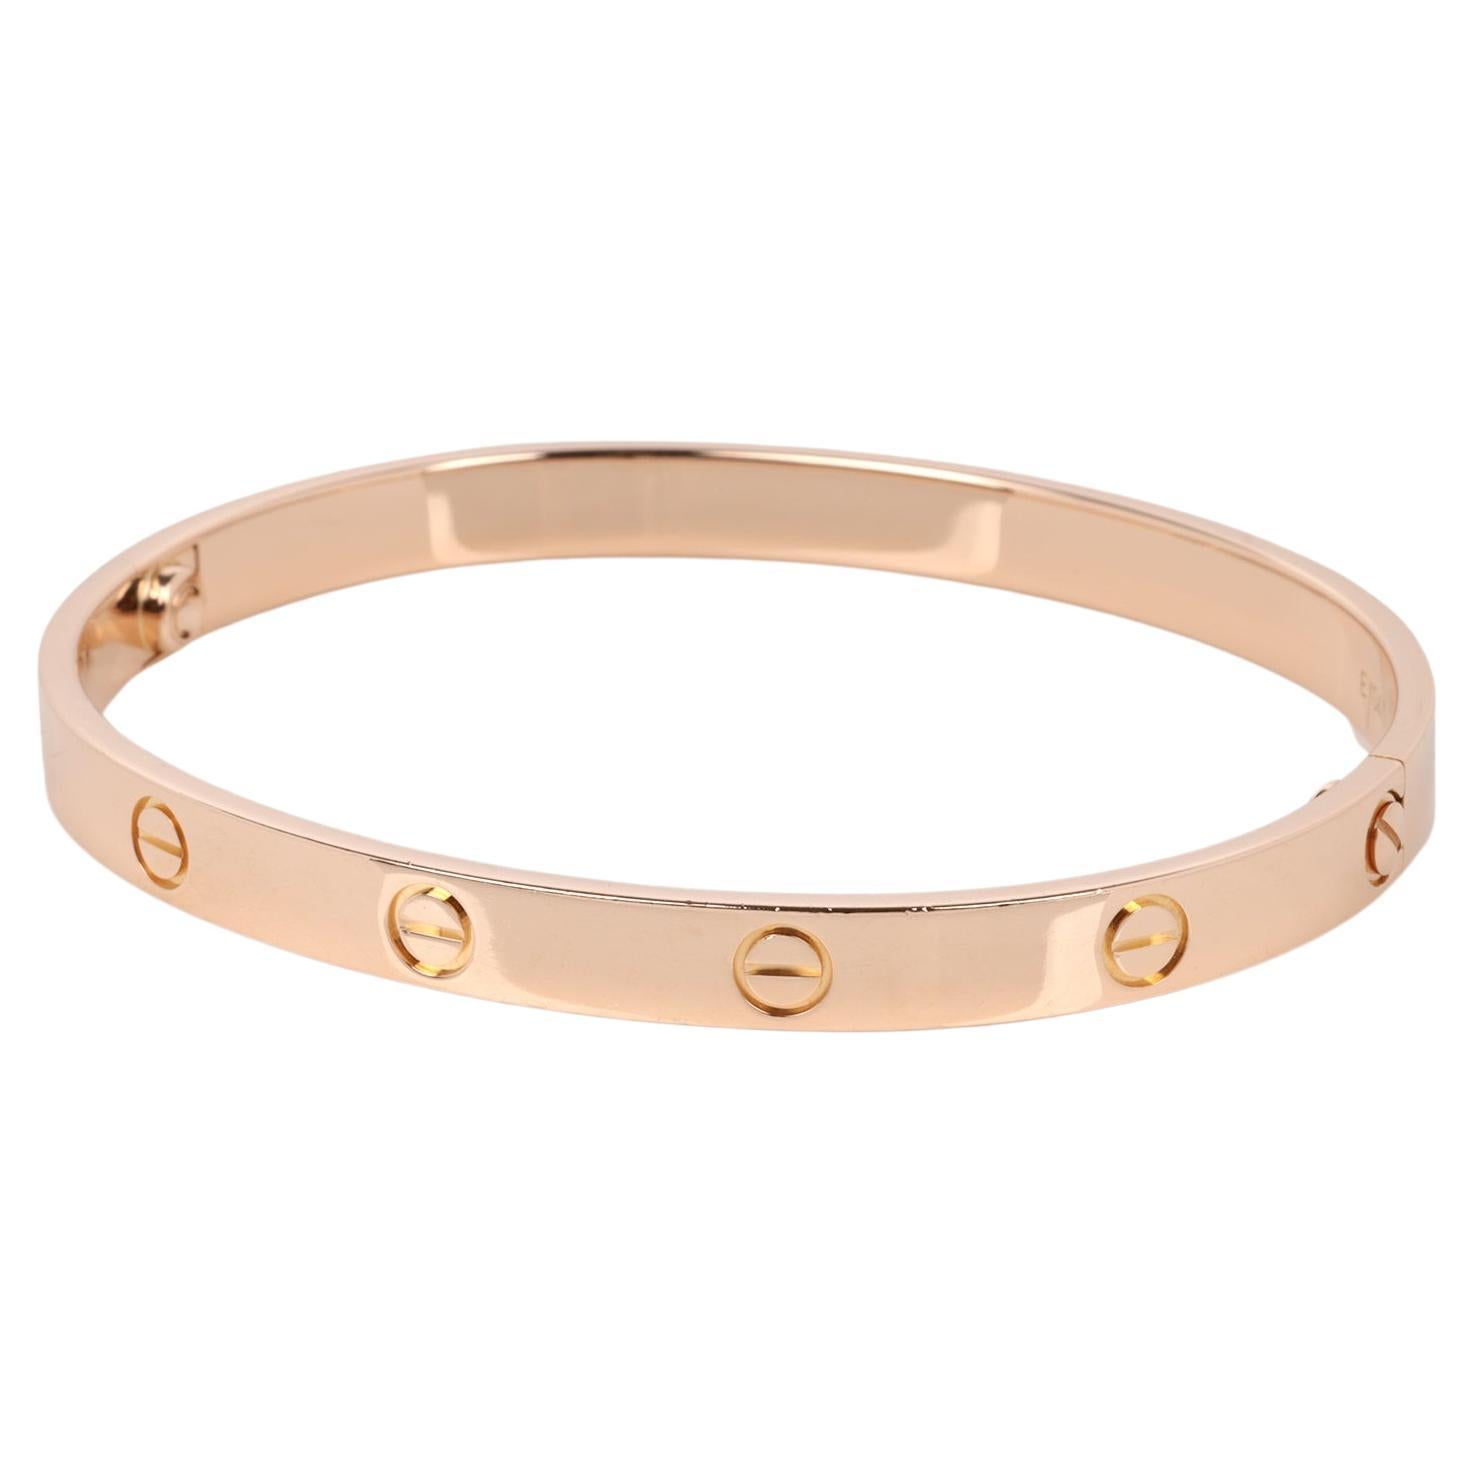 Cartier 18ct Rose Gold Love Bangle